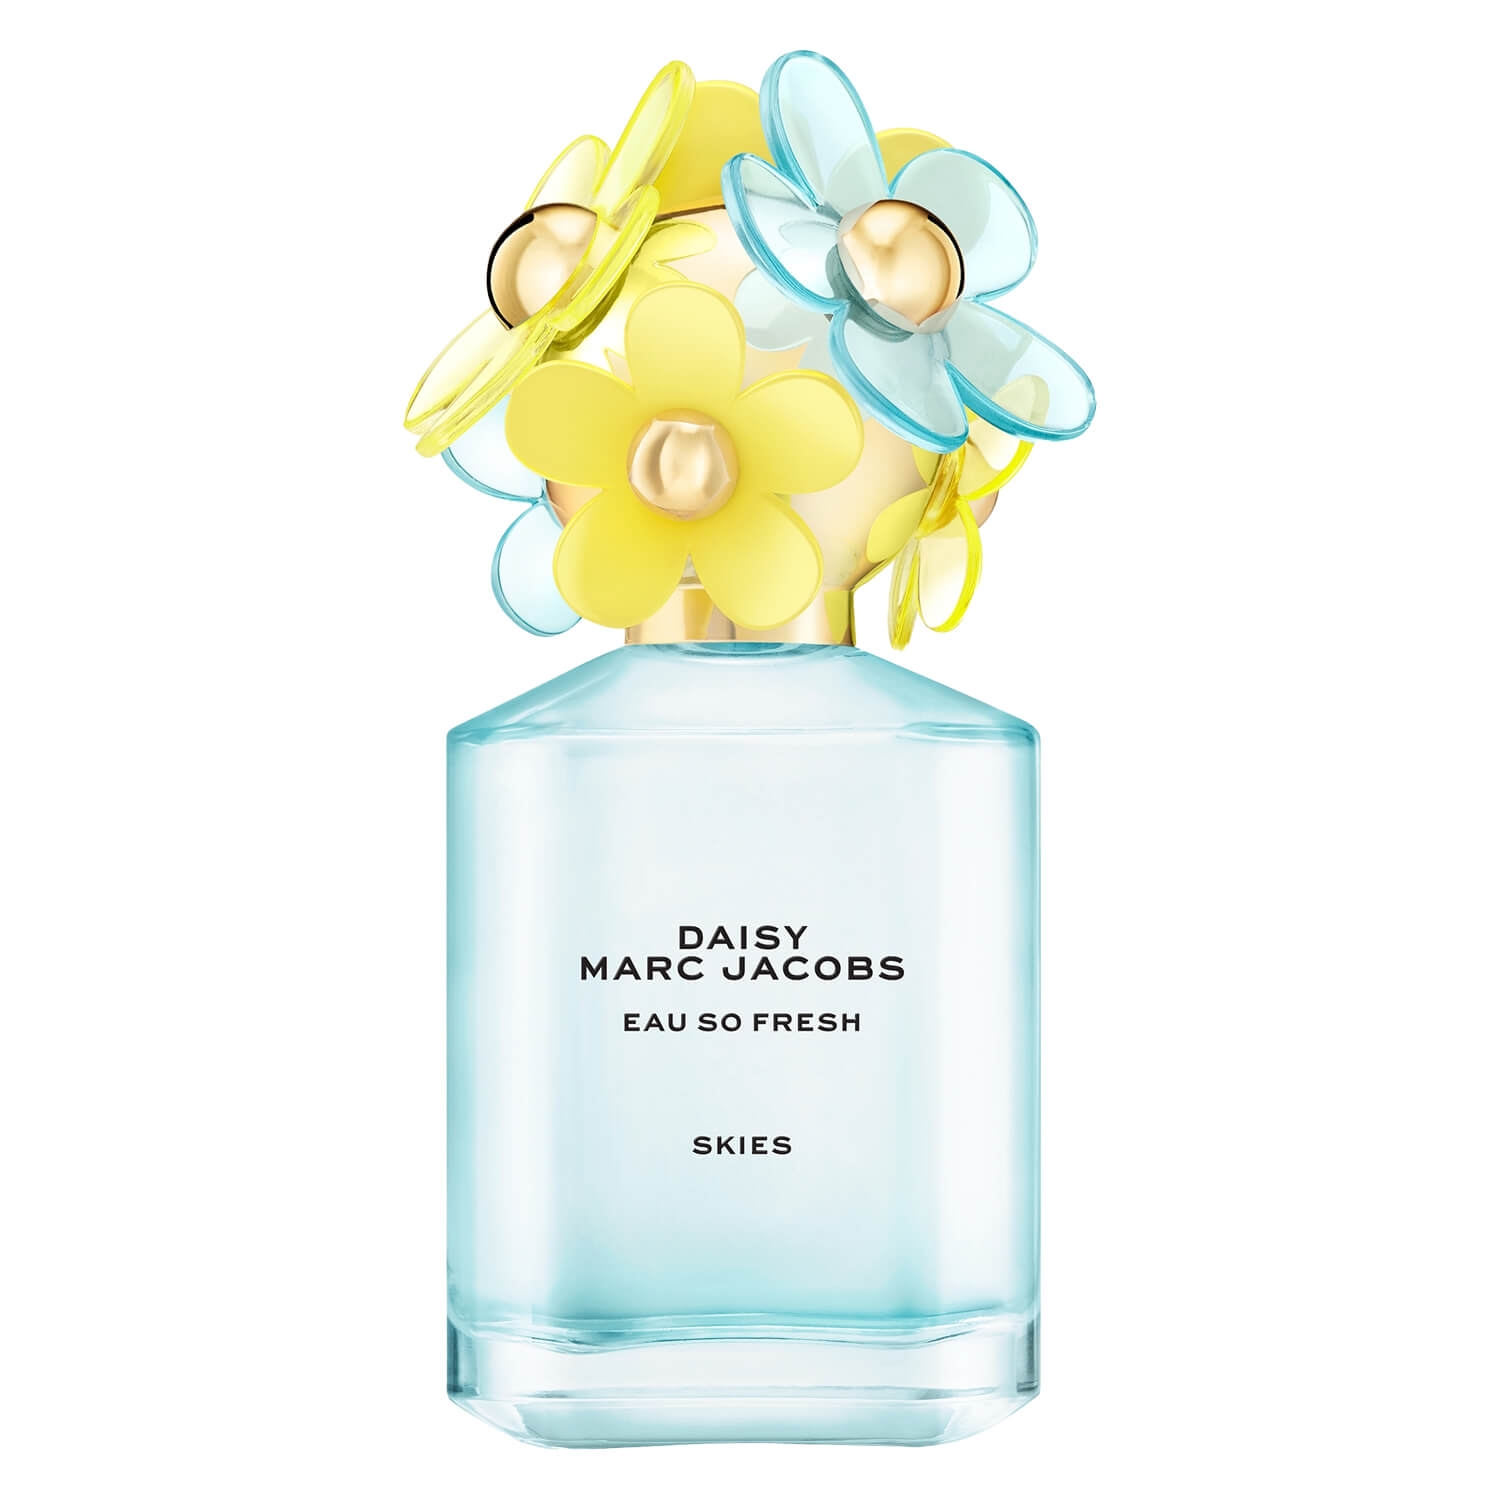 Product image from Marc Jacobs - Daisy Eau So Fresh Skies